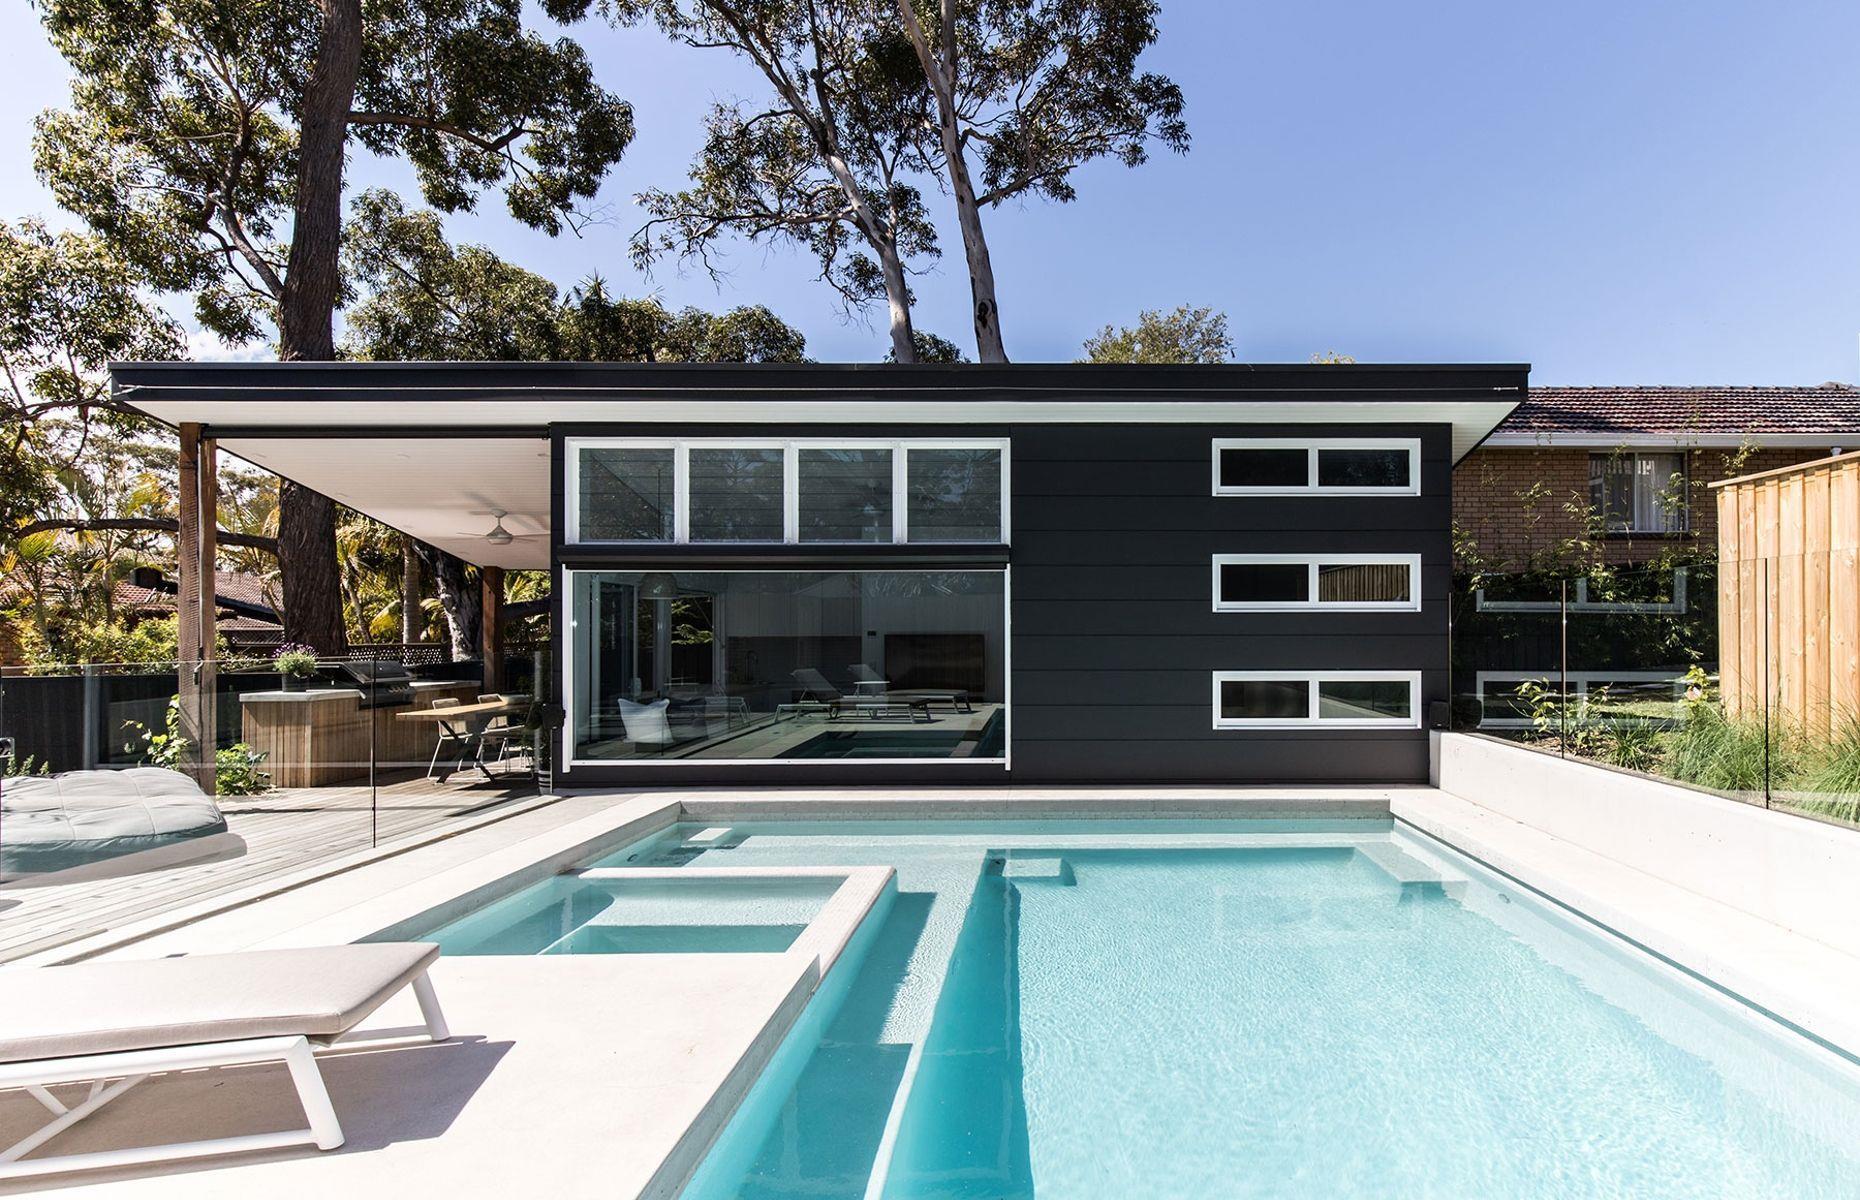 <p>Beautiful and inspirational in equal measure, this custom-made miniature mansion proves that you don't need bucket-loads of space to live well. Home to <a href="https://www.instagram.com/_tinyhaus/">Dan and Marnie Prowse</a>, the ultra-modern tiny home lies in a leafy suburb of Sydney, Australia, and was designed to perfectly suit the needs of a family of four. </p>